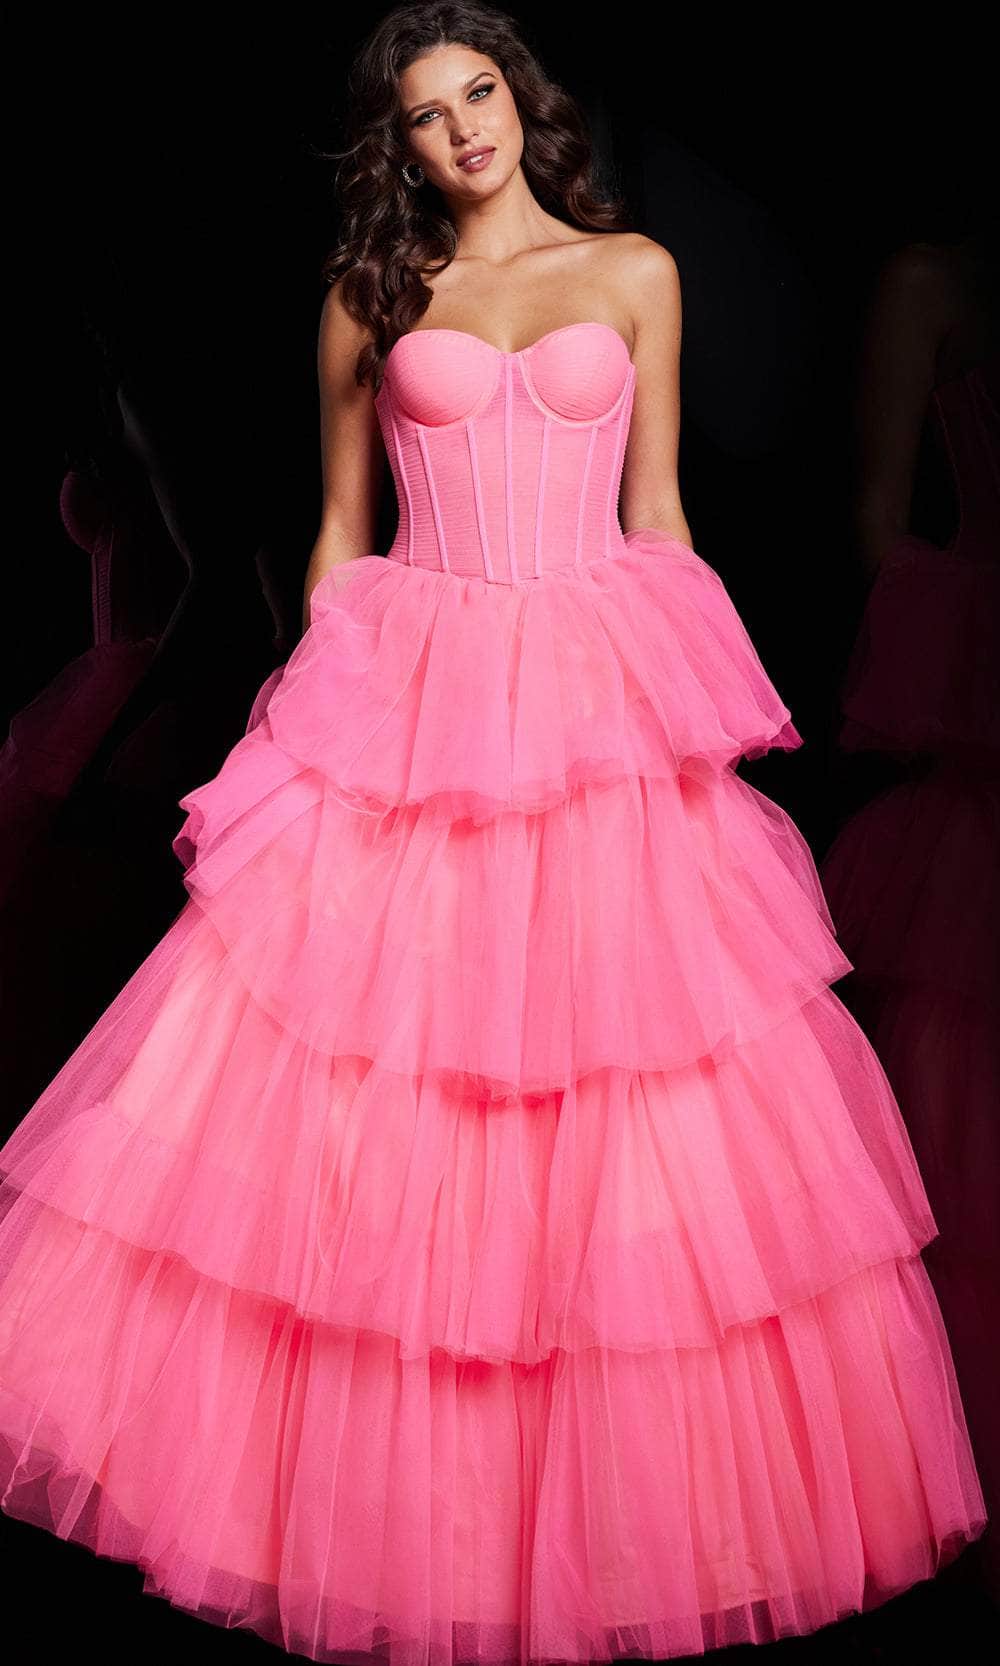 Jovani 37062 - Tulle Corset Ballgown Special Occasion Dress 00 / Hot Pink